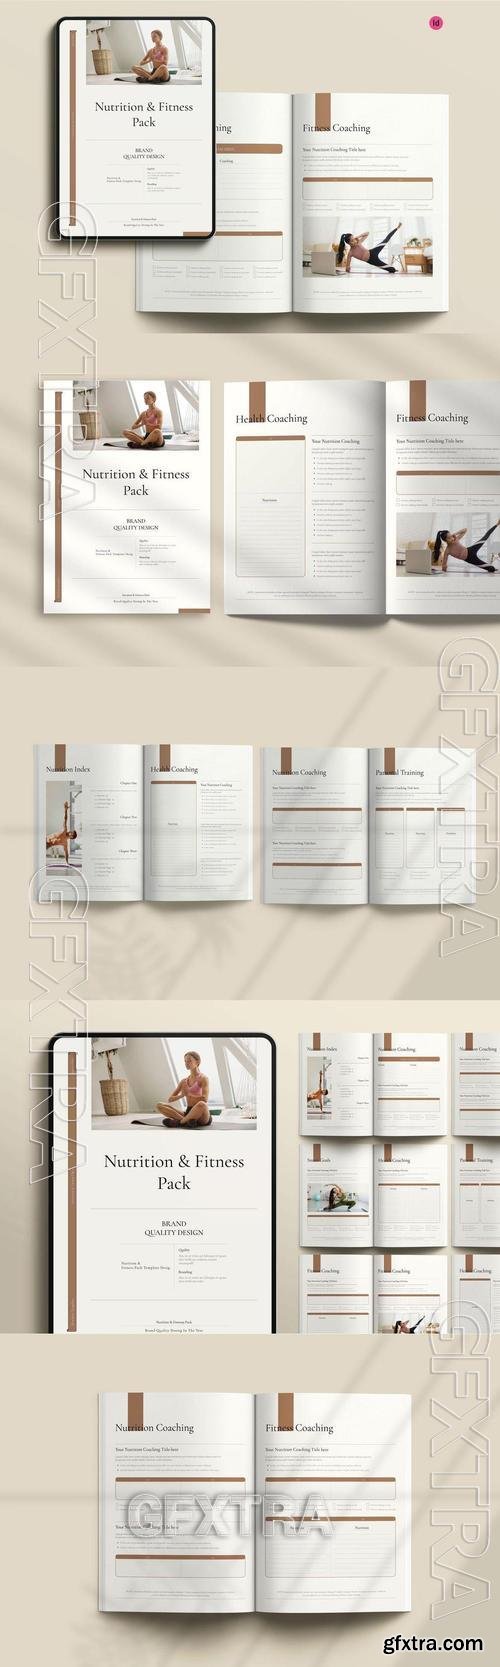 Nutrition and Fitness Pack Template NDKMQLP